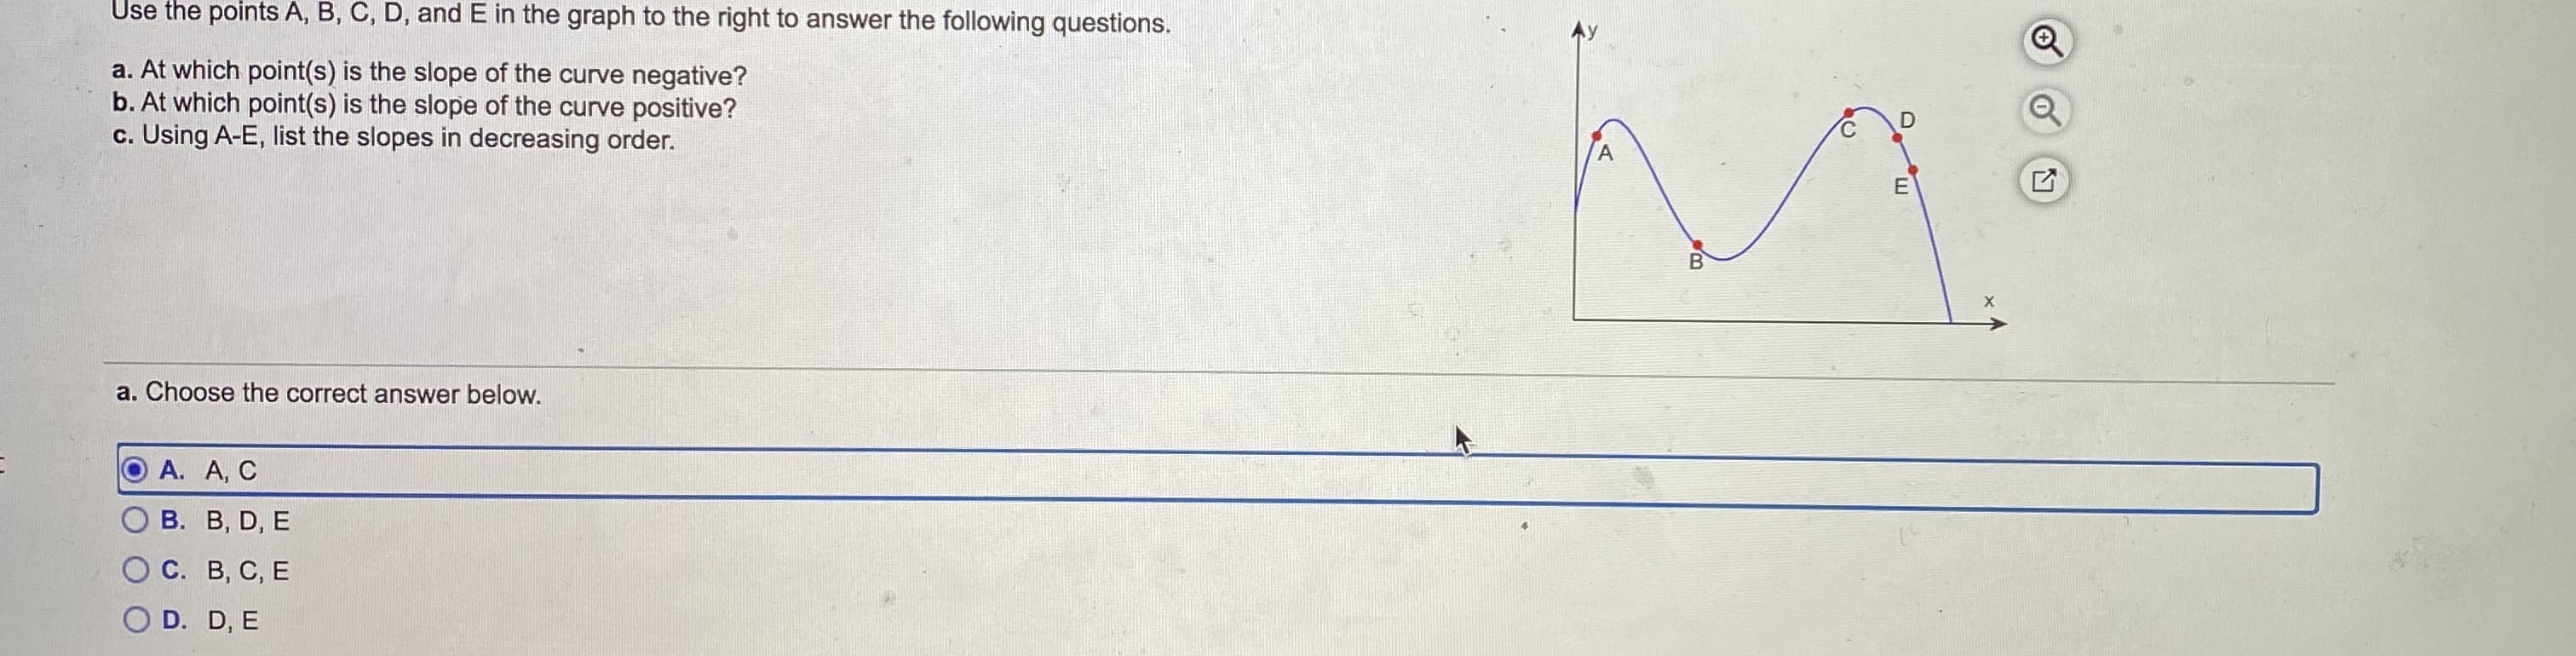 Use the points A, B, C, D, and E in the graph to the right to answer the following questions.
a. At which point(s) is the slope of the curve negative?
b. At which point(s) is the slope of the curve positive?
c. Using A-E, list the slopes in decreasing order.
a. Choose the correct answer below.
O A. A, C
B. B, D, E
C. B, C, E
D. D, E
